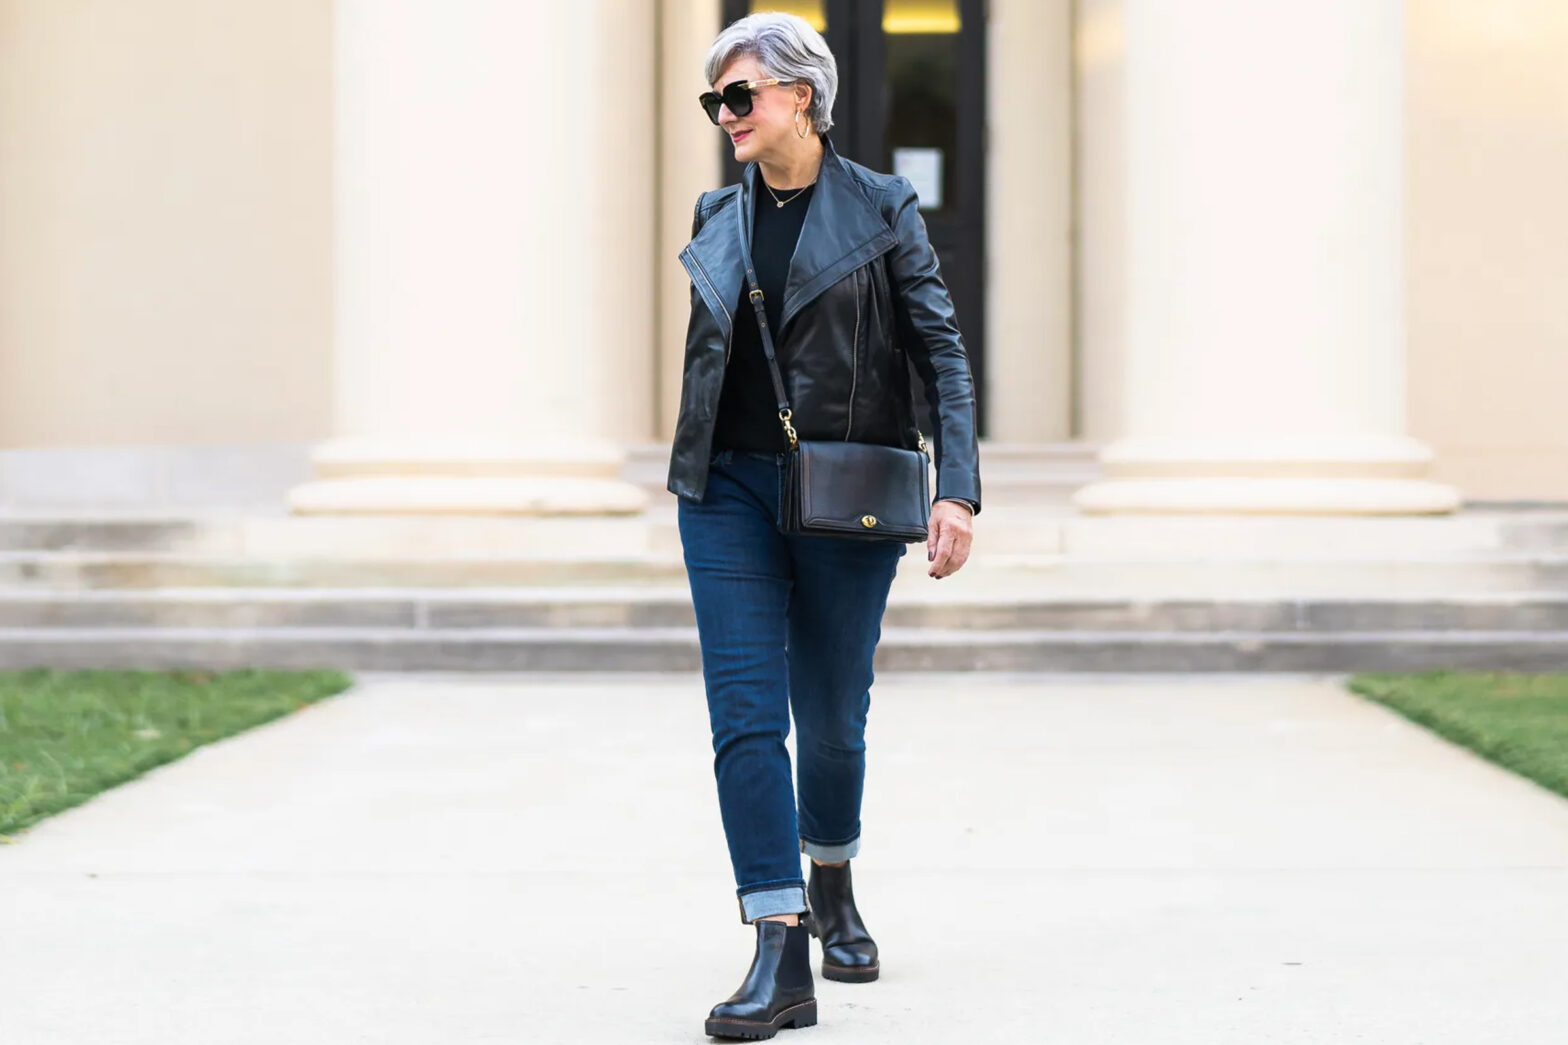 Classic Fusion The Timeless Allure of a Leather Jacket and Blue Jeans Ensemble